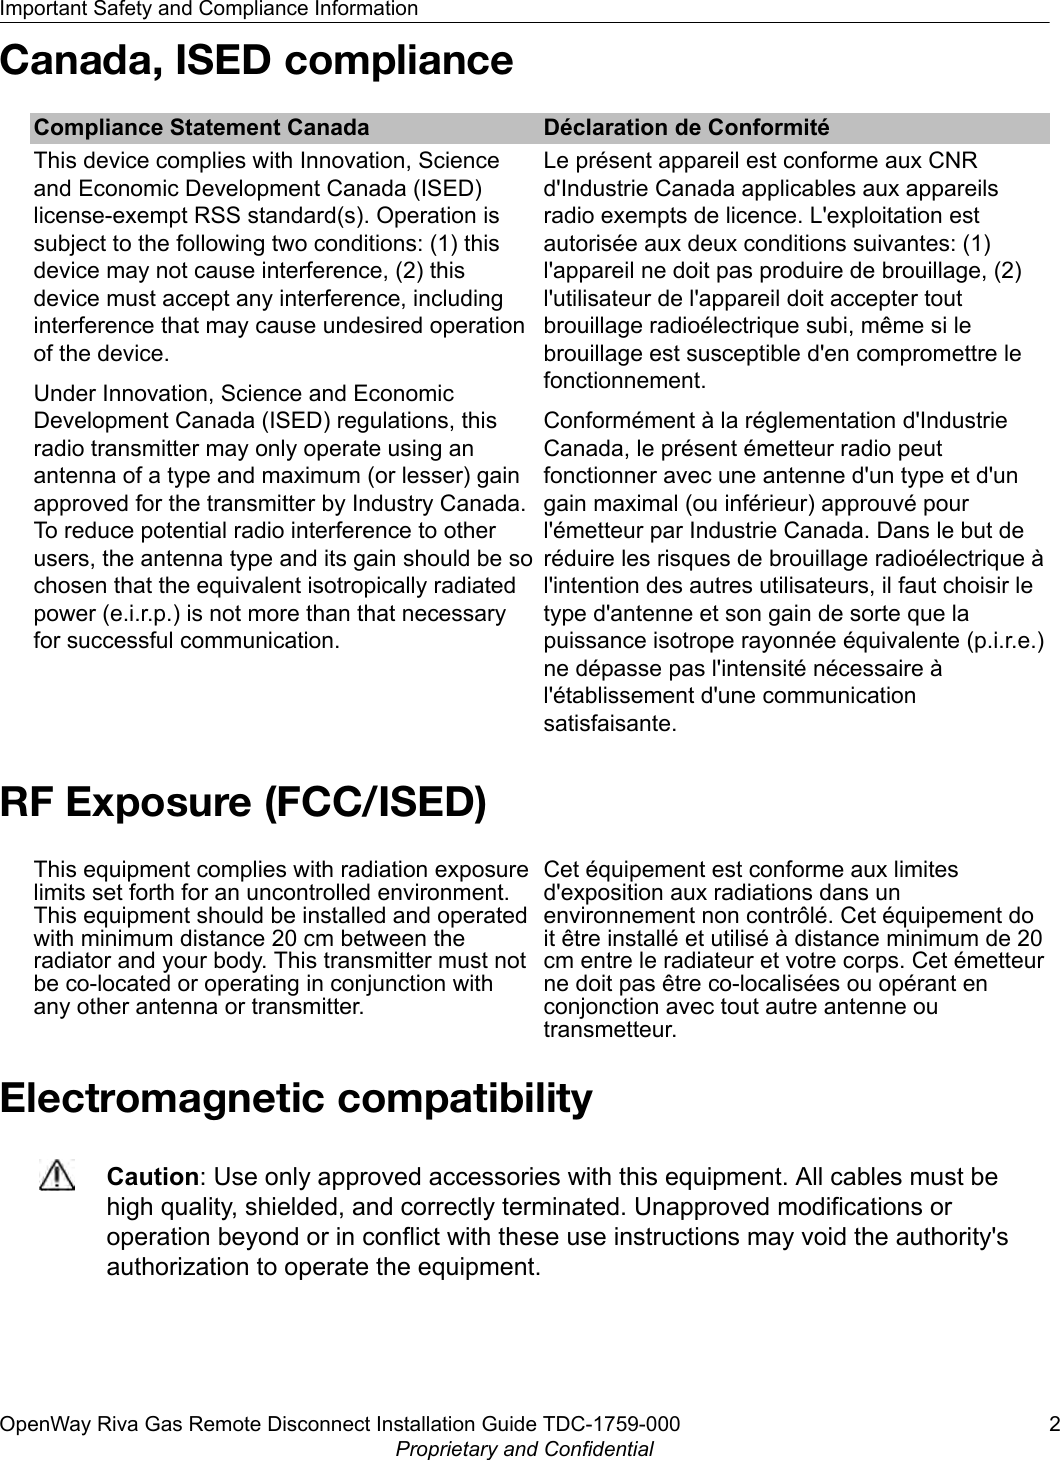 Canada, ISED complianceCompliance Statement Canada Déclaration de ConformitéThis device complies with Innovation, Scienceand Economic Development Canada (ISED)license-exempt RSS standard(s). Operation issubject to the following two conditions: (1) thisdevice may not cause interference, (2) thisdevice must accept any interference, includinginterference that may cause undesired operationof the device.Under Innovation, Science and EconomicDevelopment Canada (ISED) regulations, thisradio transmitter may only operate using anantenna of a type and maximum (or lesser) gainapproved for the transmitter by Industry Canada.To reduce potential radio interference to otherusers, the antenna type and its gain should be sochosen that the equivalent isotropically radiatedpower (e.i.r.p.) is not more than that necessaryfor successful communication.Le présent appareil est conforme aux CNRd&apos;Industrie Canada applicables aux appareilsradio exempts de licence. L&apos;exploitation estautorisée aux deux conditions suivantes: (1)l&apos;appareil ne doit pas produire de brouillage, (2)l&apos;utilisateur de l&apos;appareil doit accepter toutbrouillage radioélectrique subi, même si lebrouillage est susceptible d&apos;en compromettre lefonctionnement.Conformément à la réglementation d&apos;IndustrieCanada, le présent émetteur radio peutfonctionner avec une antenne d&apos;un type et d&apos;ungain maximal (ou inférieur) approuvé pourl&apos;émetteur par Industrie Canada. Dans le but deréduire les risques de brouillage radioélectrique àl&apos;intention des autres utilisateurs, il faut choisir letype d&apos;antenne et son gain de sorte que lapuissance isotrope rayonnée équivalente (p.i.r.e.)ne dépasse pas l&apos;intensité nécessaire àl&apos;établissement d&apos;une communicationsatisfaisante.RF Exposure (FCC/ISED)This equipment complies with radiation exposurelimits set forth for an uncontrolled environment.This equipment should be installed and operatedwith minimum distance 20 cm between theradiator and your body. This transmitter must notbe co-located or operating in conjunction withany other antenna or transmitter.Cet équipement est conforme aux limitesd&apos;exposition aux radiations dans unenvironnement non contrôlé. Cet équipement doit être installé et utilisé à distance minimum de 20cm entre le radiateur et votre corps. Cet émetteurne doit pas être co-localisées ou opérant enconjonction avec tout autre antenne outransmetteur.Electromagnetic compatibilityCaution: Use only approved accessories with this equipment. All cables must behigh quality, shielded, and correctly terminated. Unapproved modifications oroperation beyond or in conflict with these use instructions may void the authority&apos;sauthorization to operate the equipment.Important Safety and Compliance InformationOpenWay Riva Gas Remote Disconnect Installation Guide TDC-1759-000 2Proprietary and Confidential